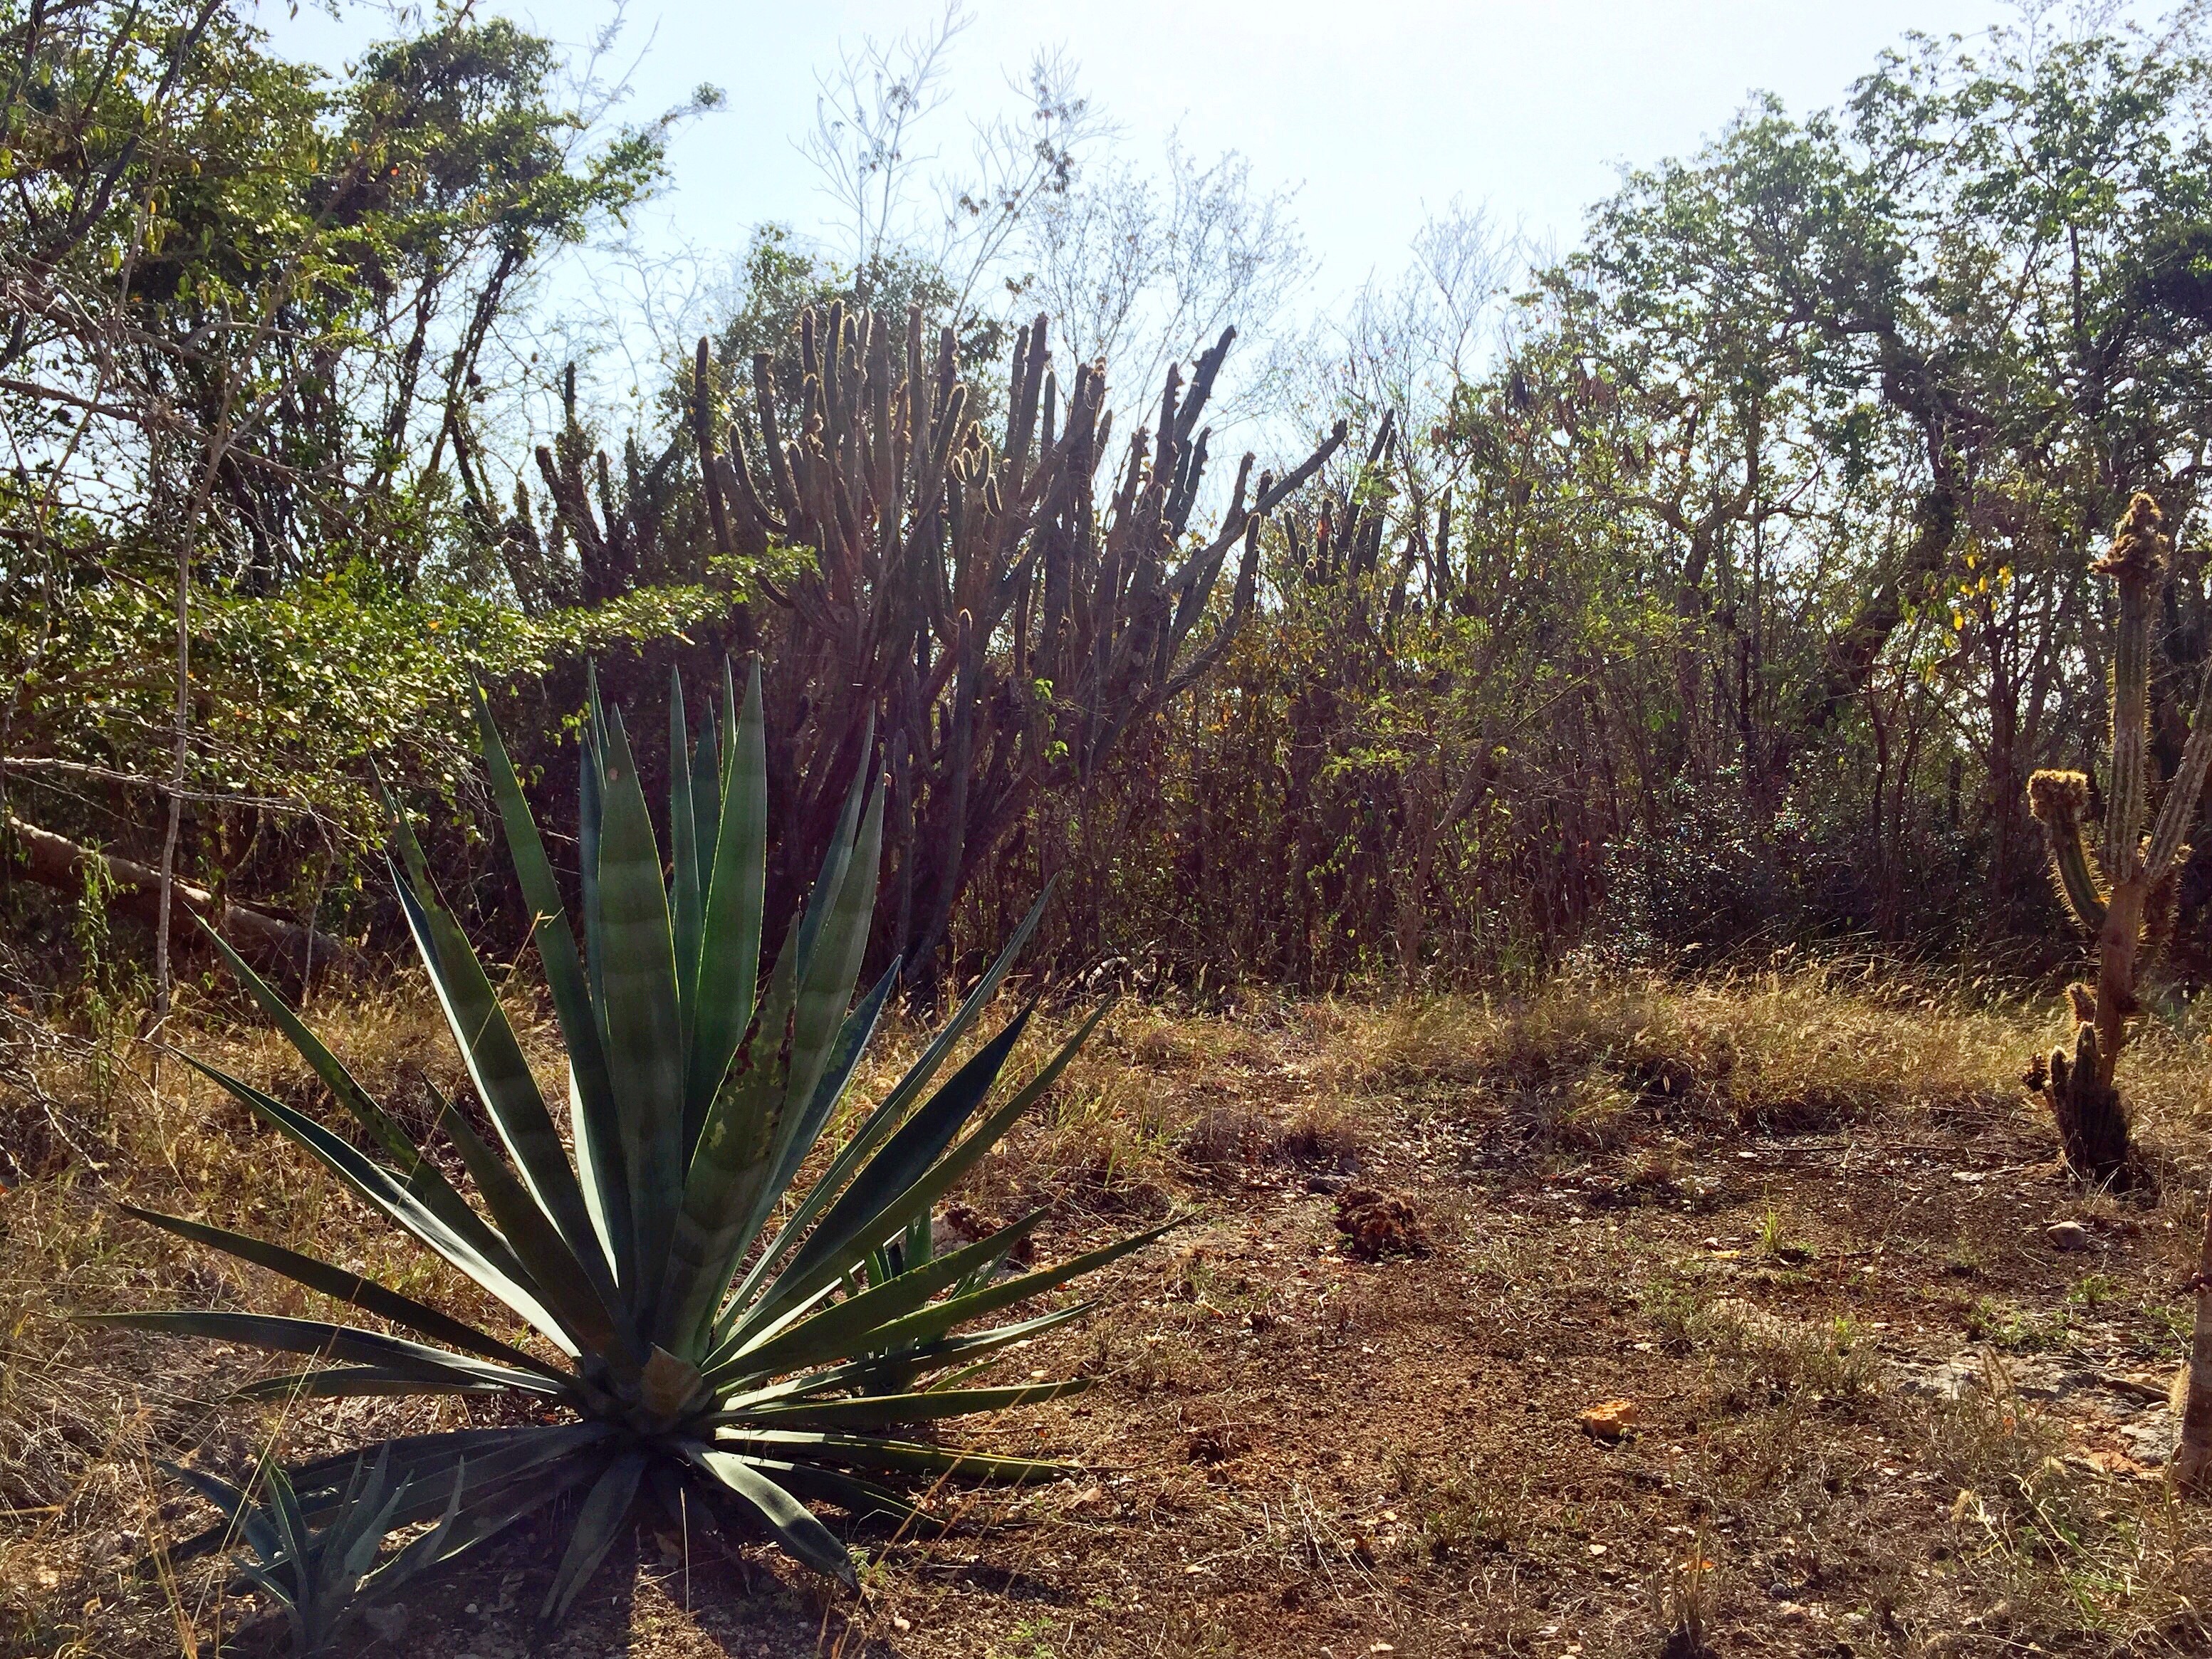 A scene of dry forest plants with a short bush in the foreground